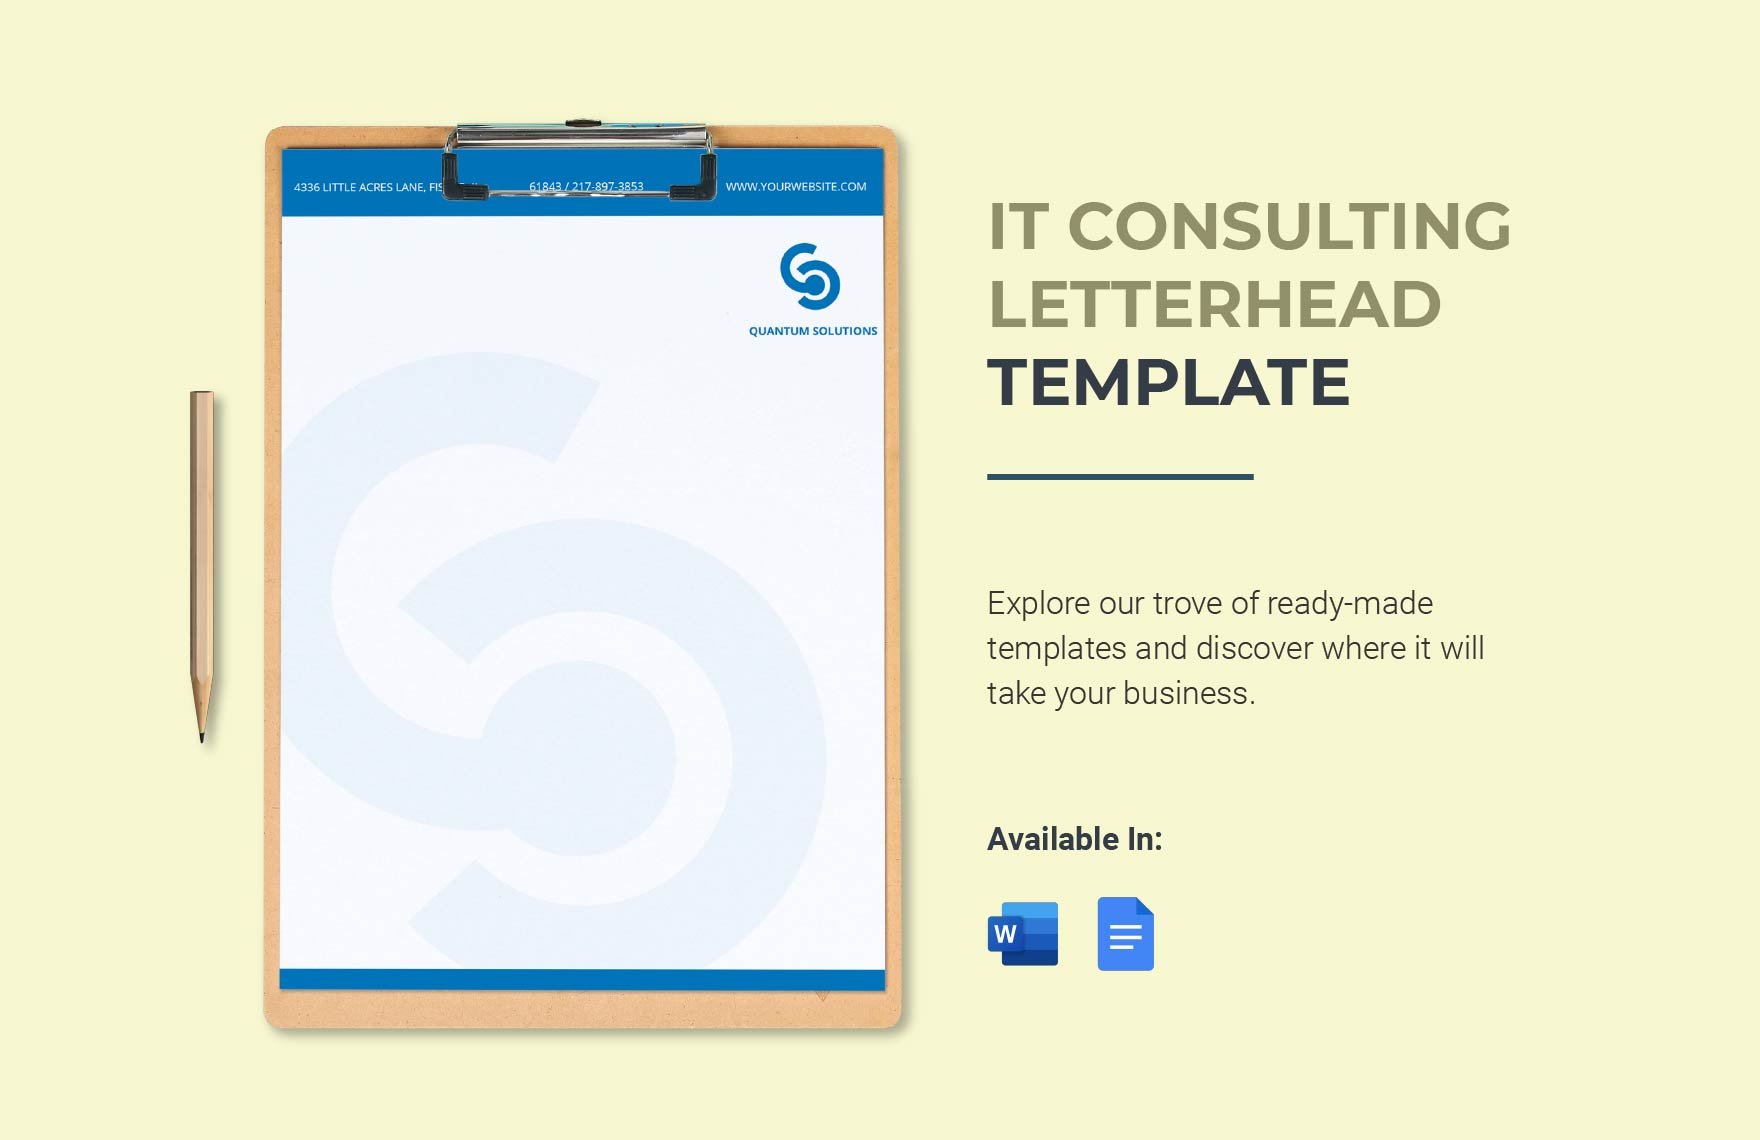 IT Consulting Letterhead Template in Word, Google Docs